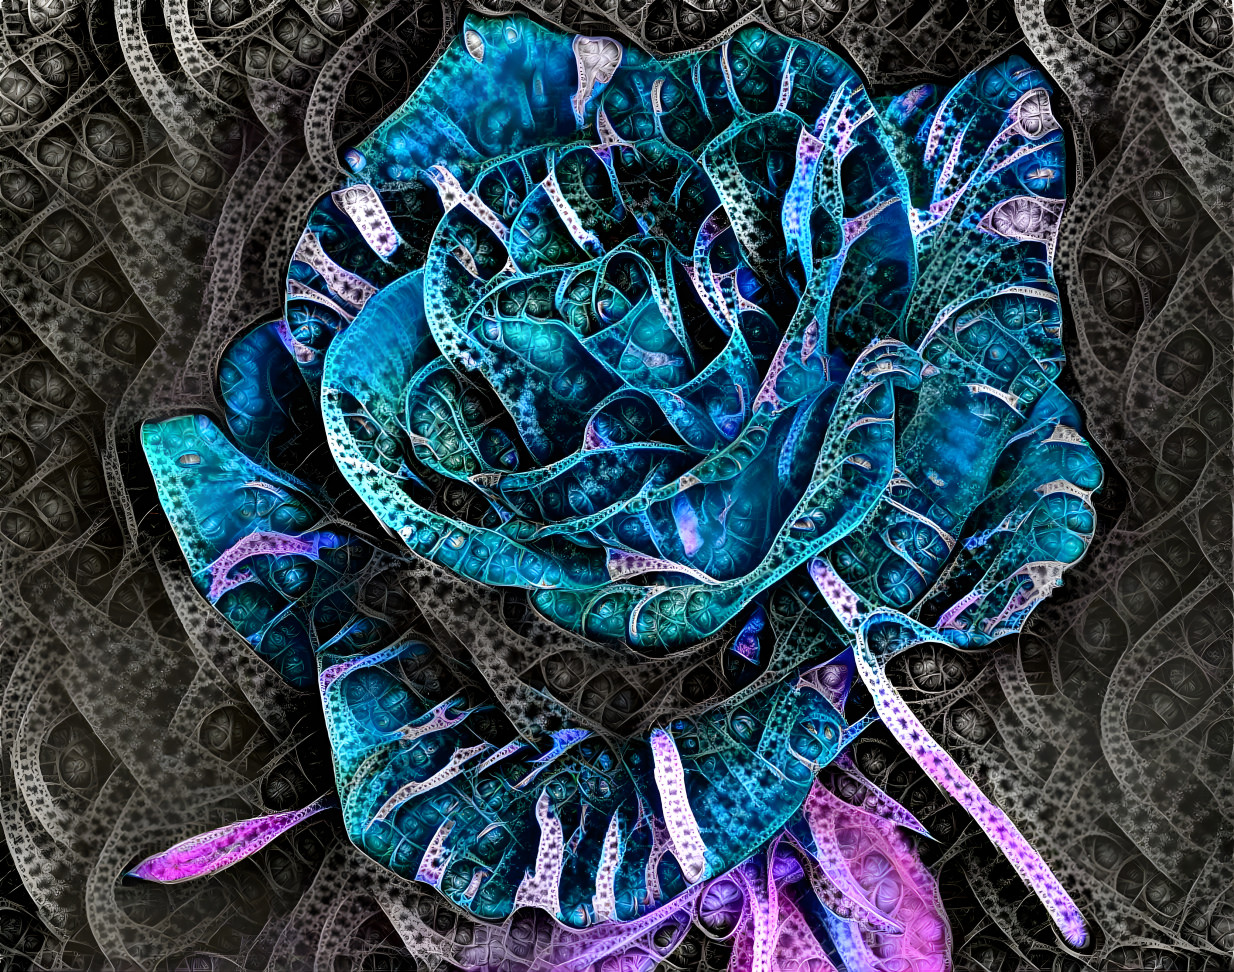 Turquoise crocheted rose